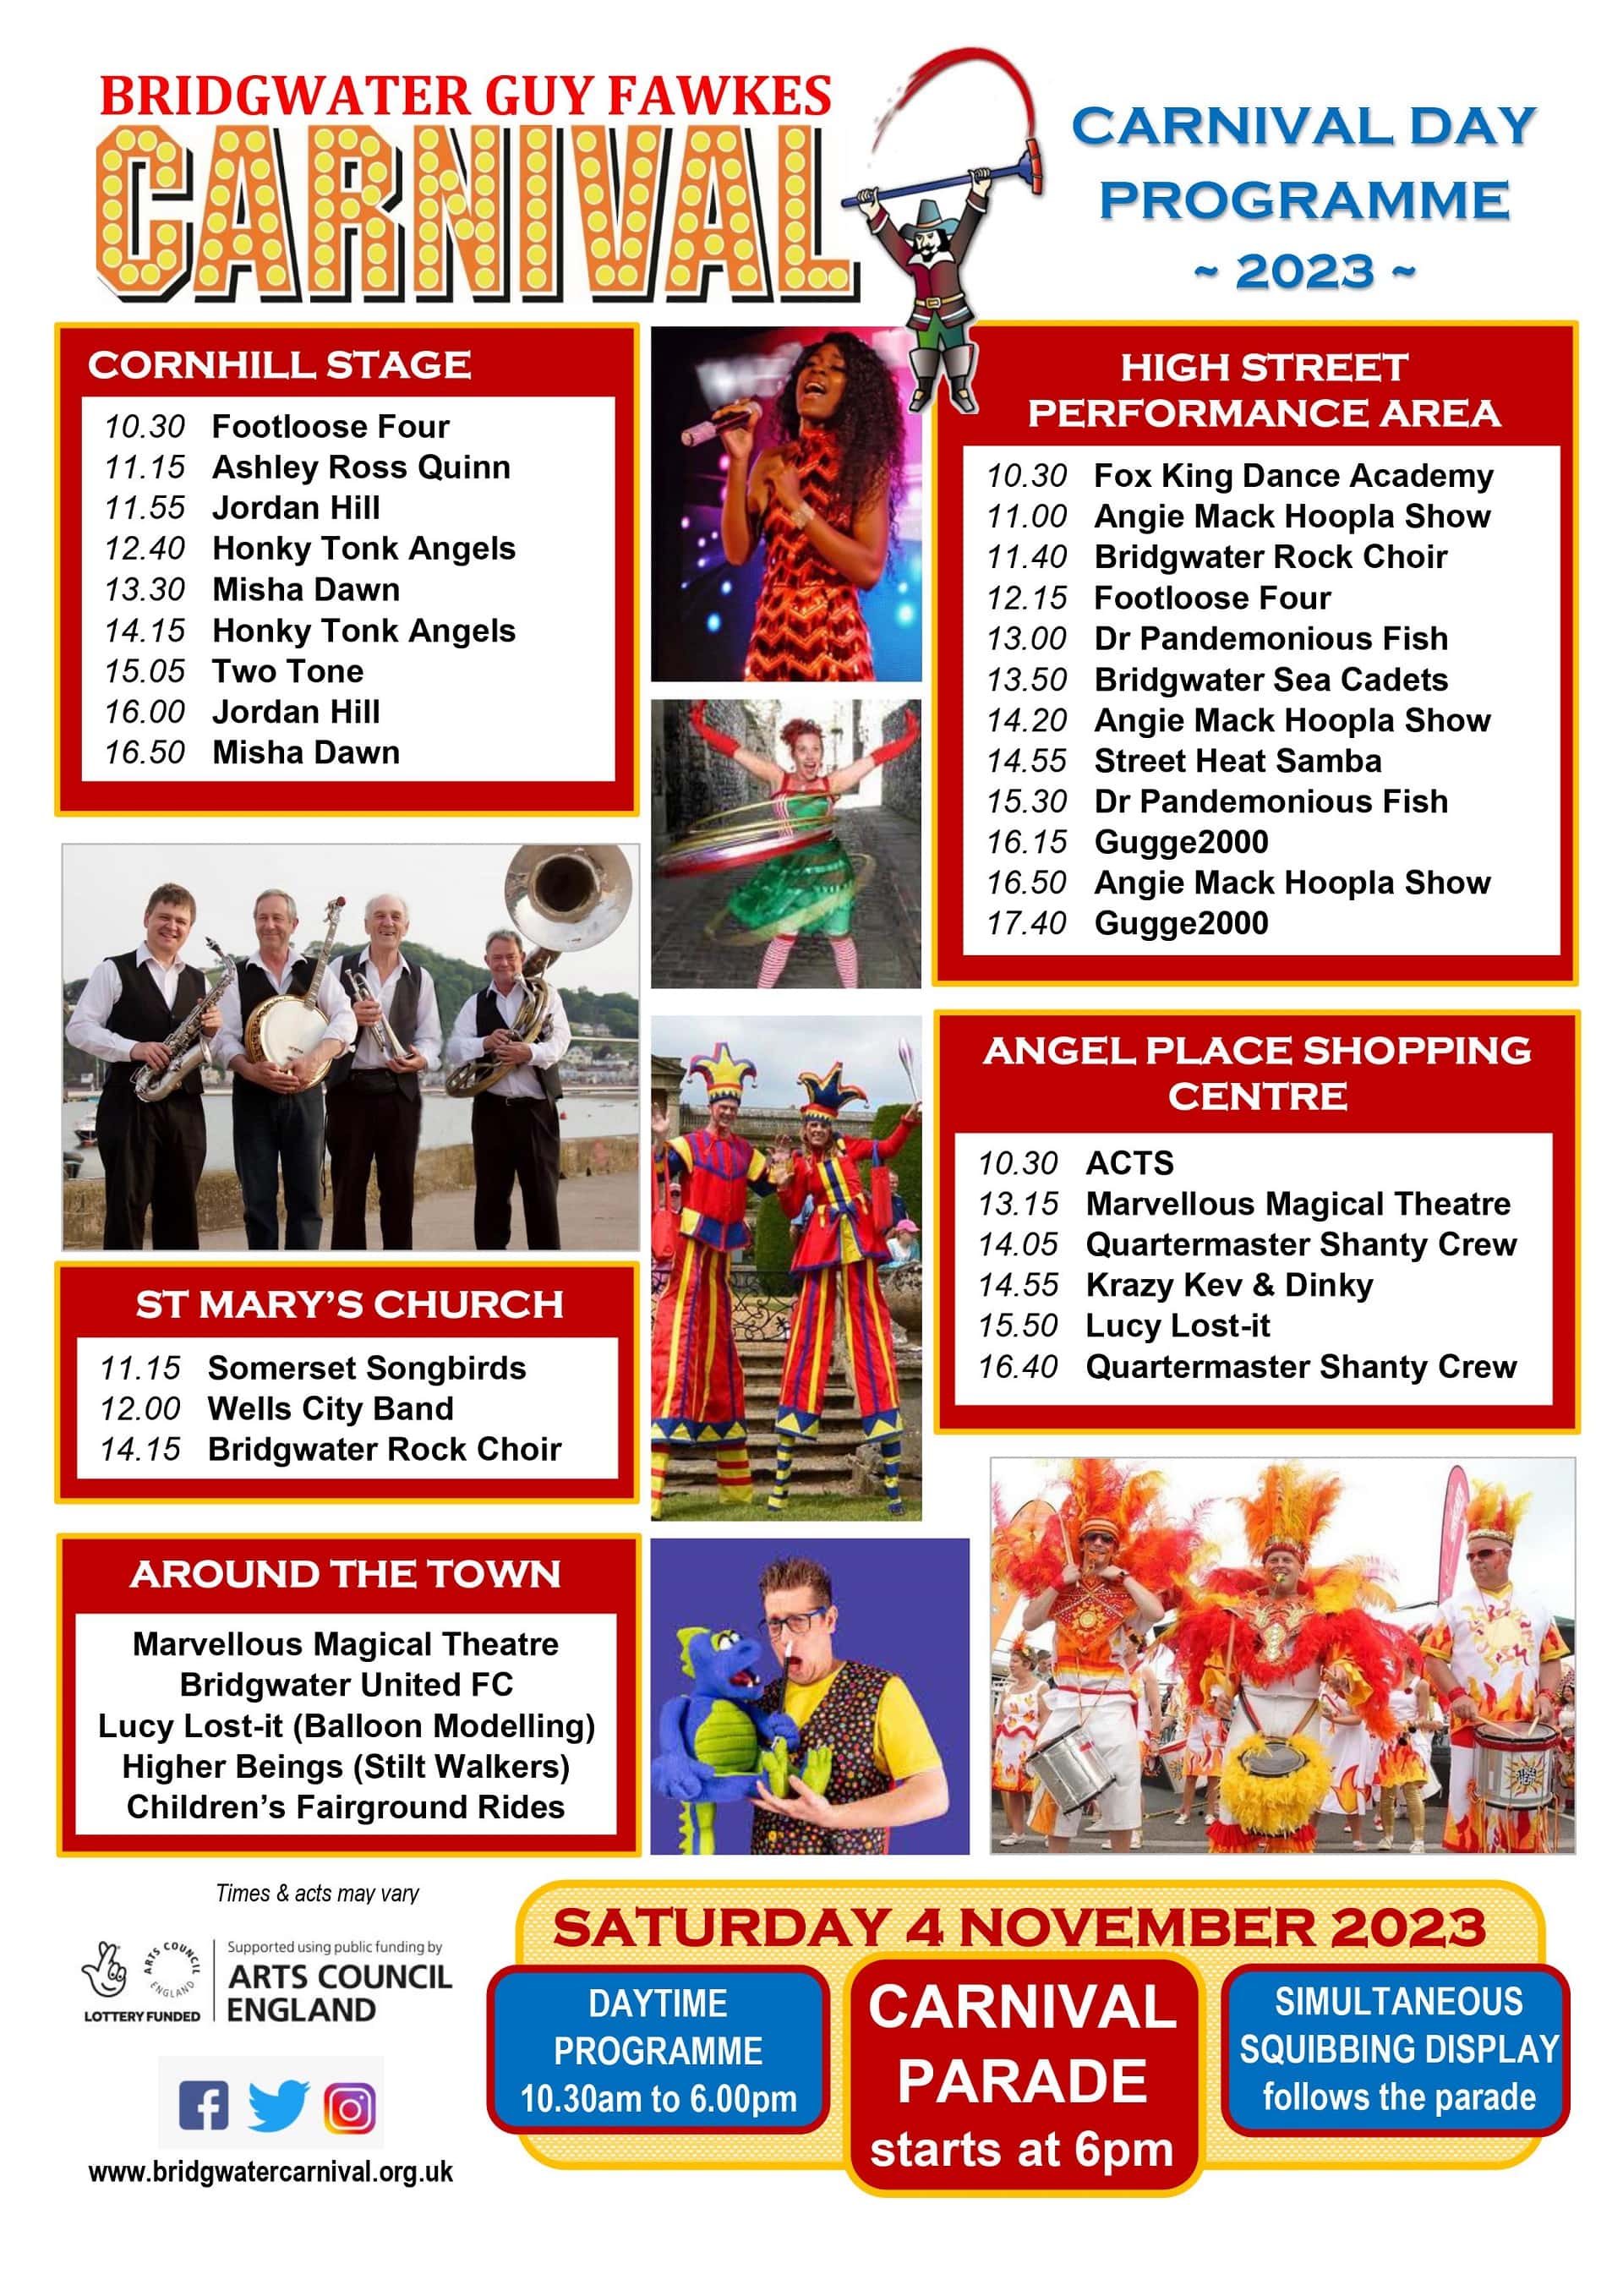 2023 Carnival Day Programme Poster